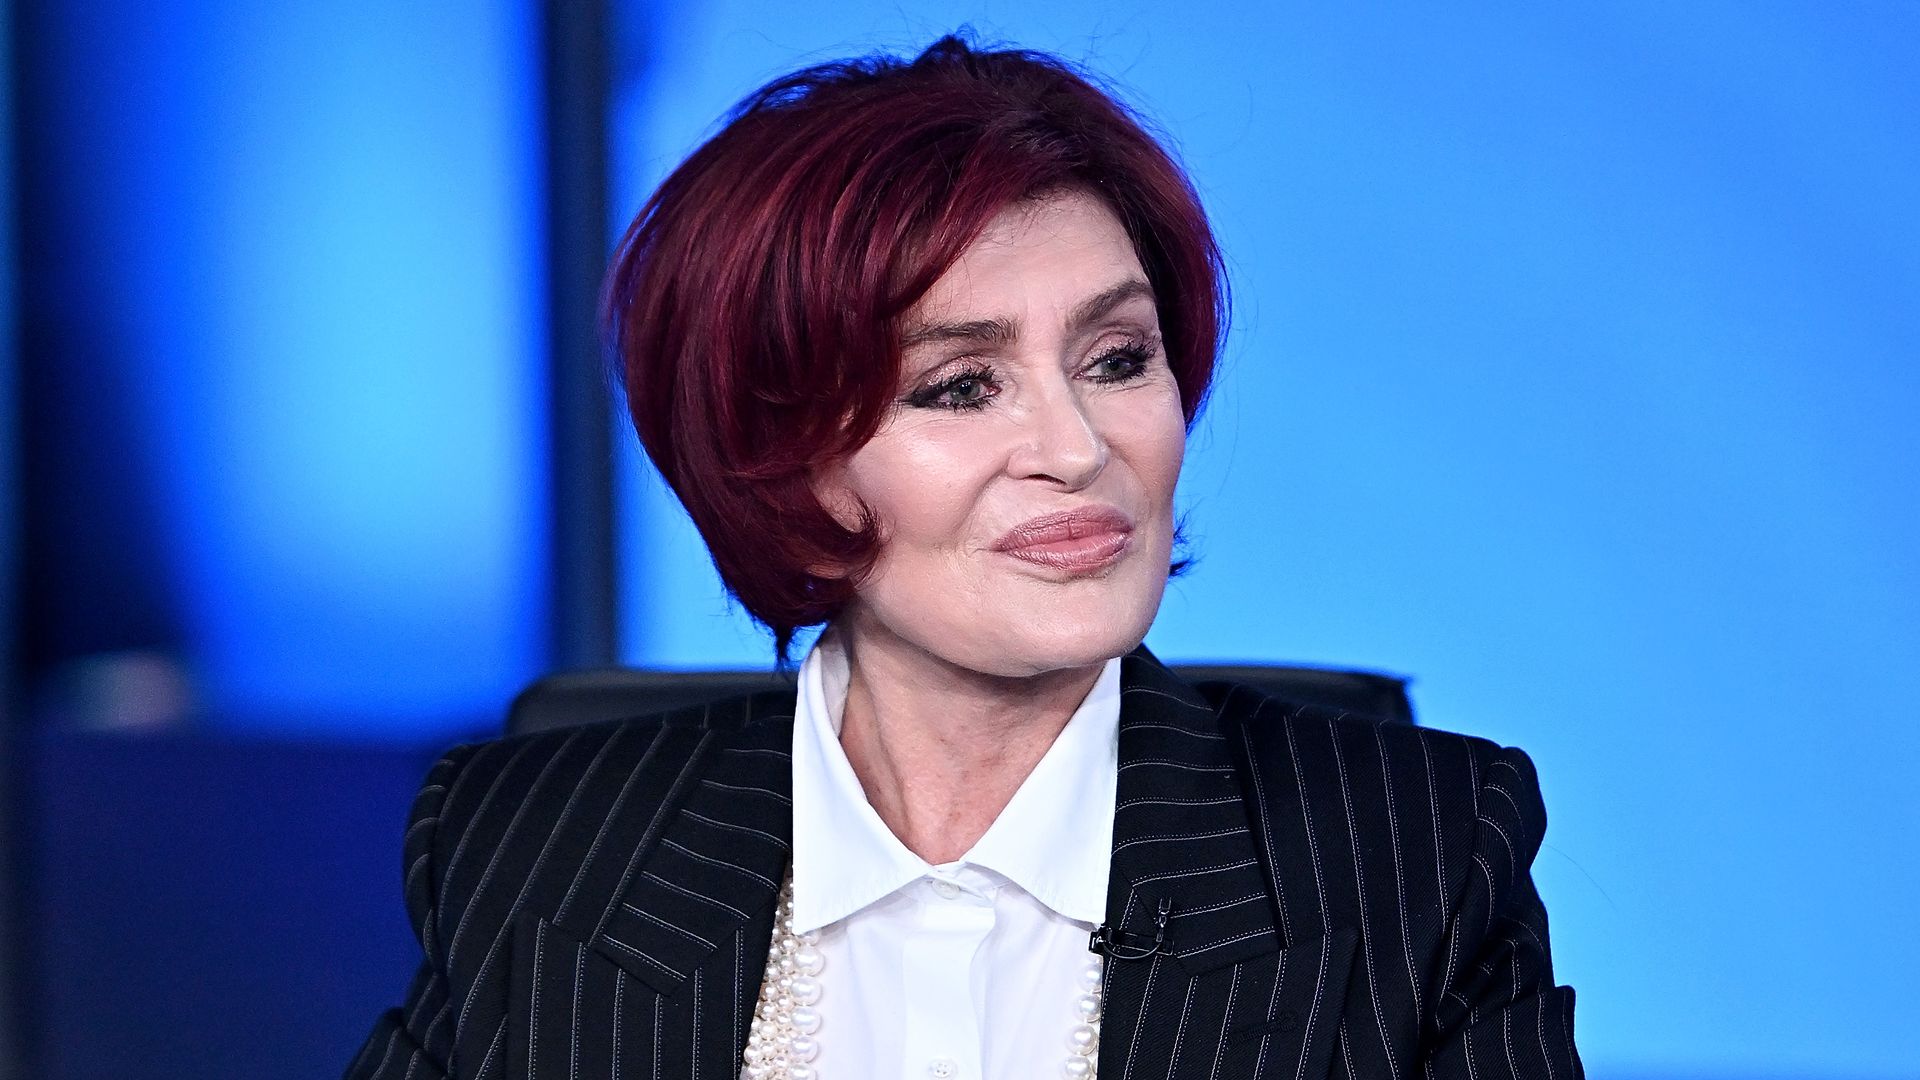 Sharon Osbourne in a pin strip suit on TV